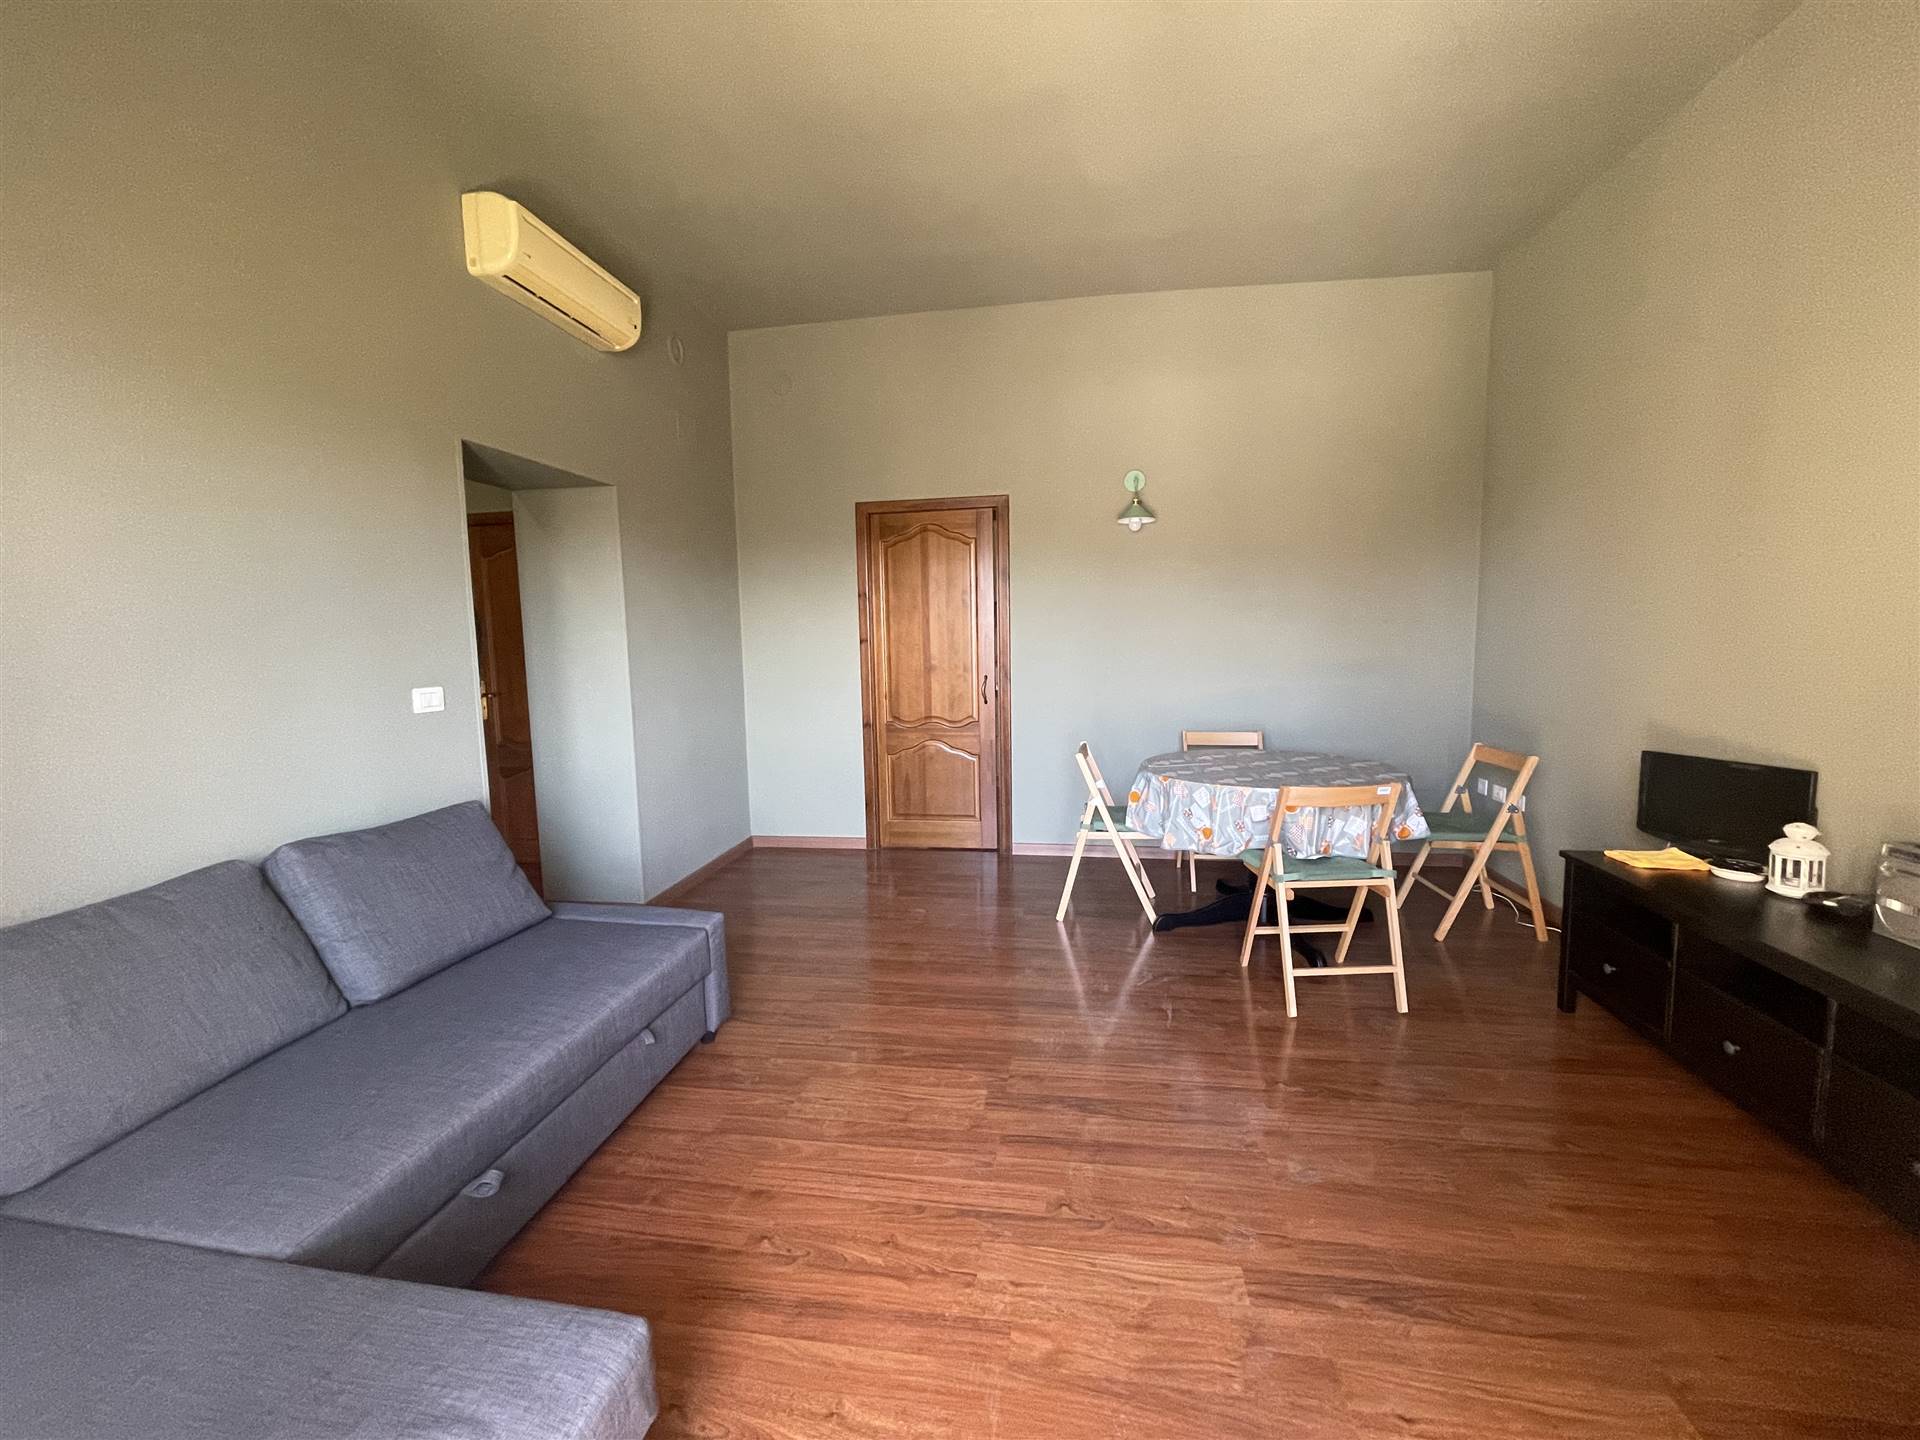 SANTA ROSA, LECCE, Apartment for sale of 85 Sq. mt., Restored, Heating Individual heating system, Energetic class: F, Epi: 100,9 kwh/m2 year, placed 